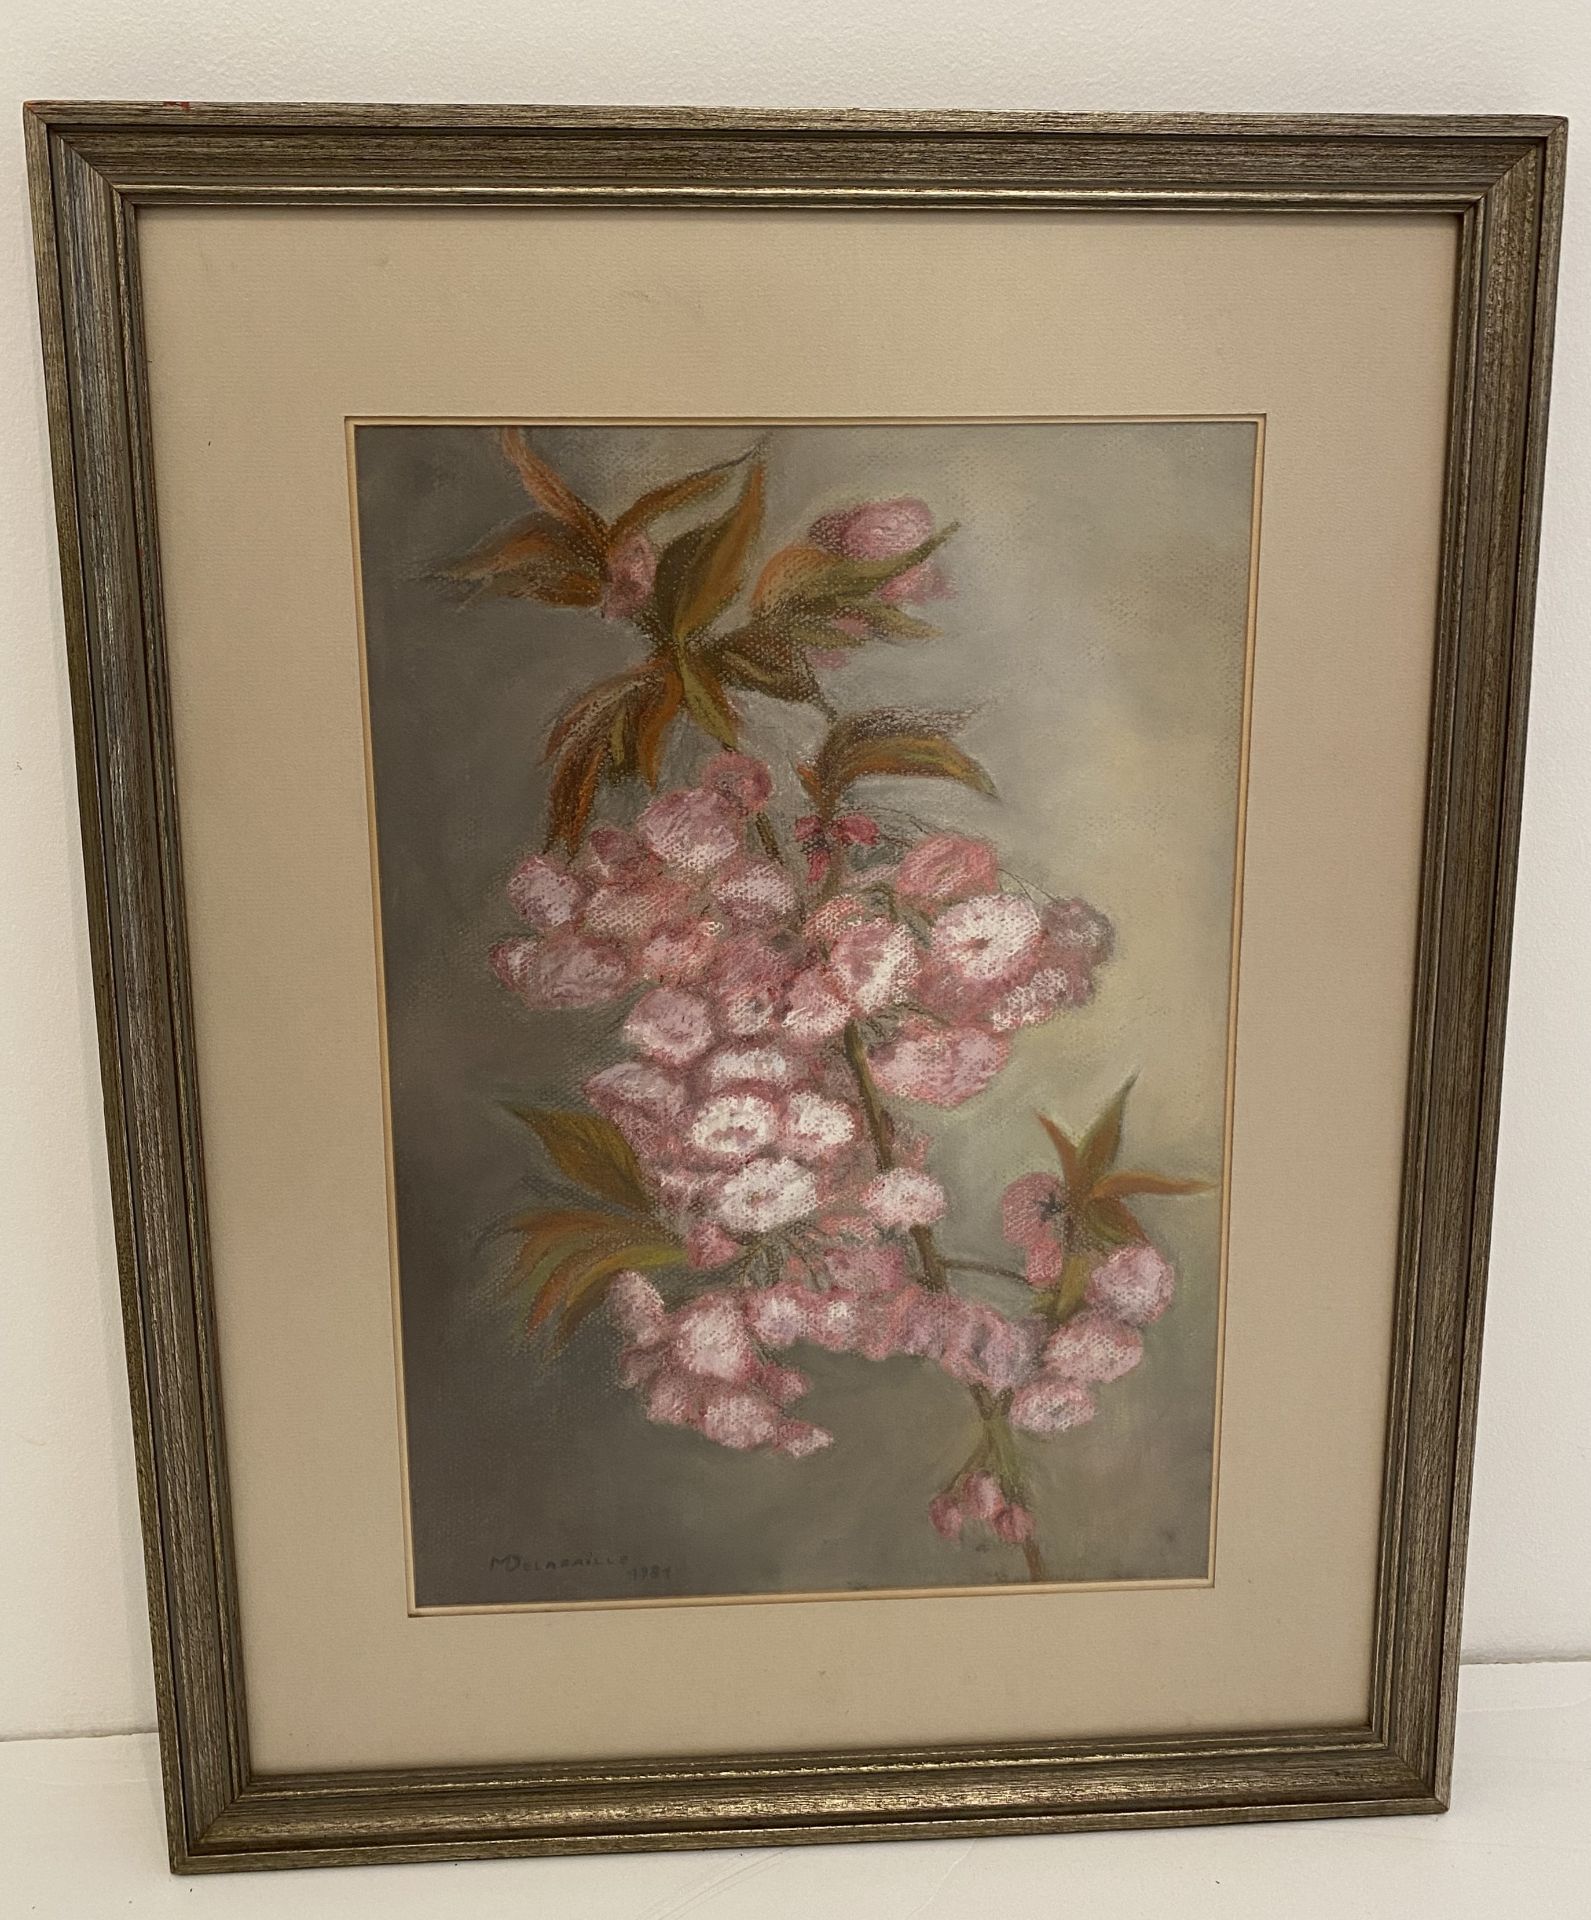 Painting "Flowers" signed M.Delafaille dated 1981